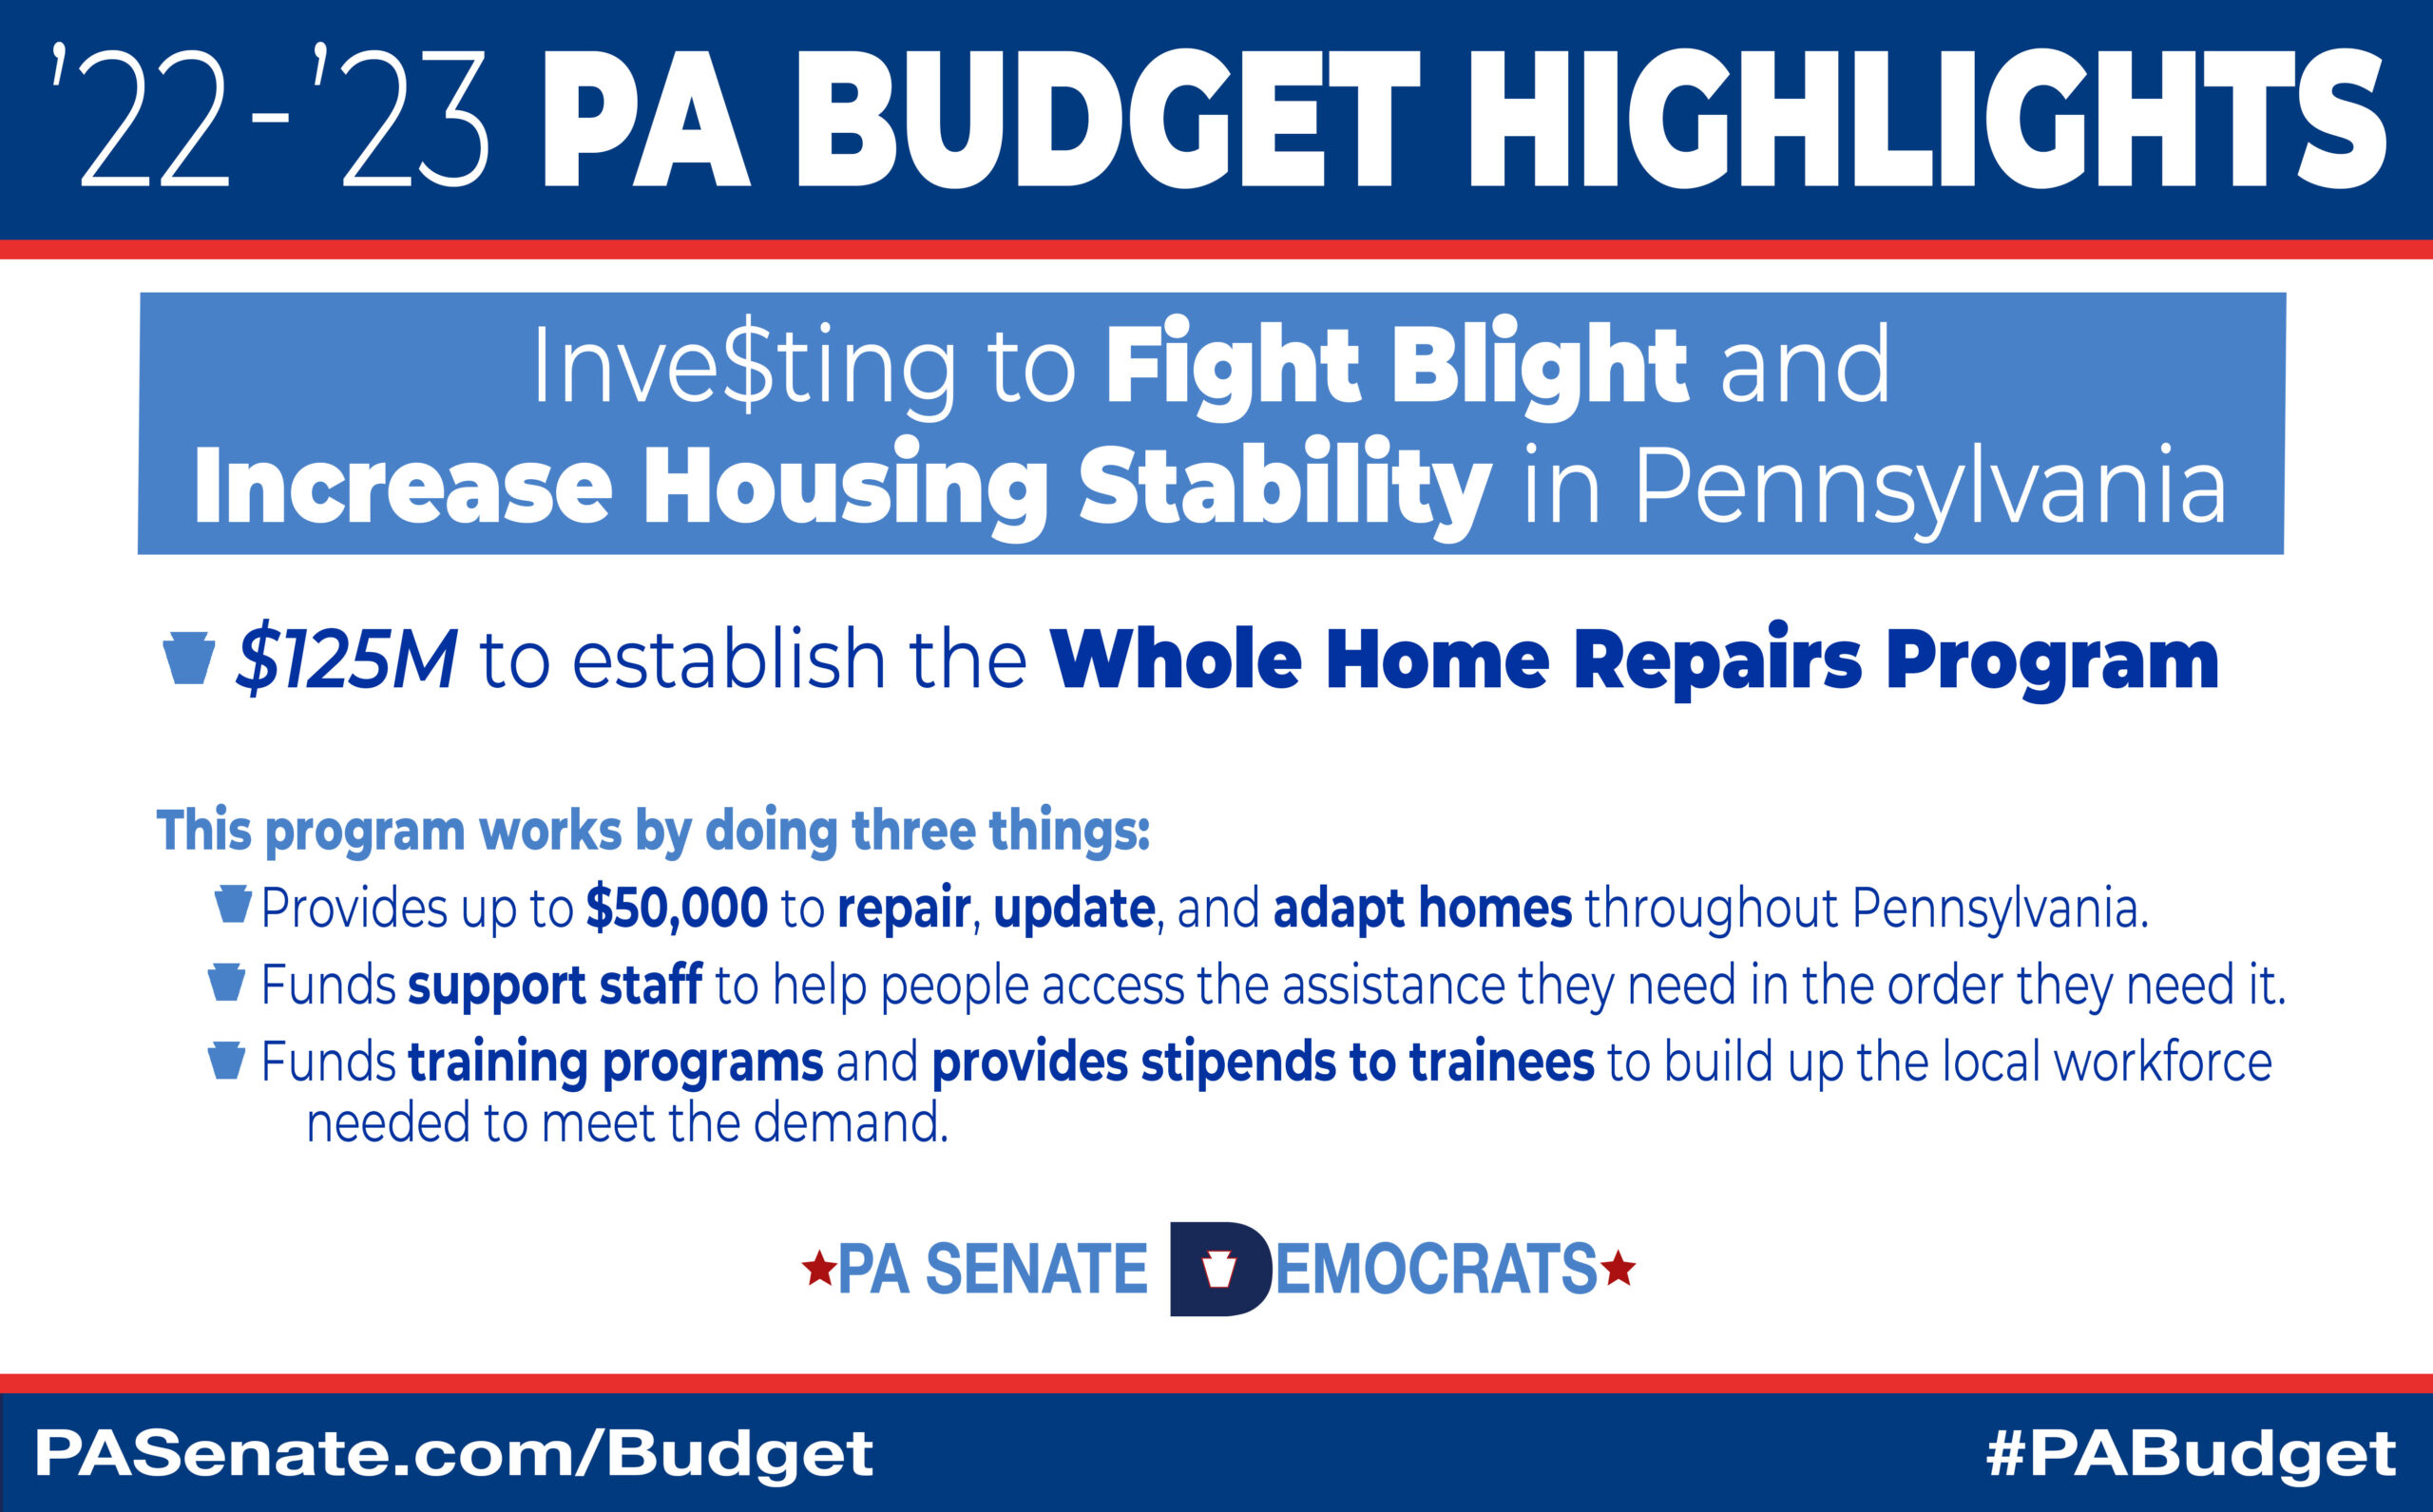 Investing to Fight Blight and Increase Housing Stability in Pennsylvania